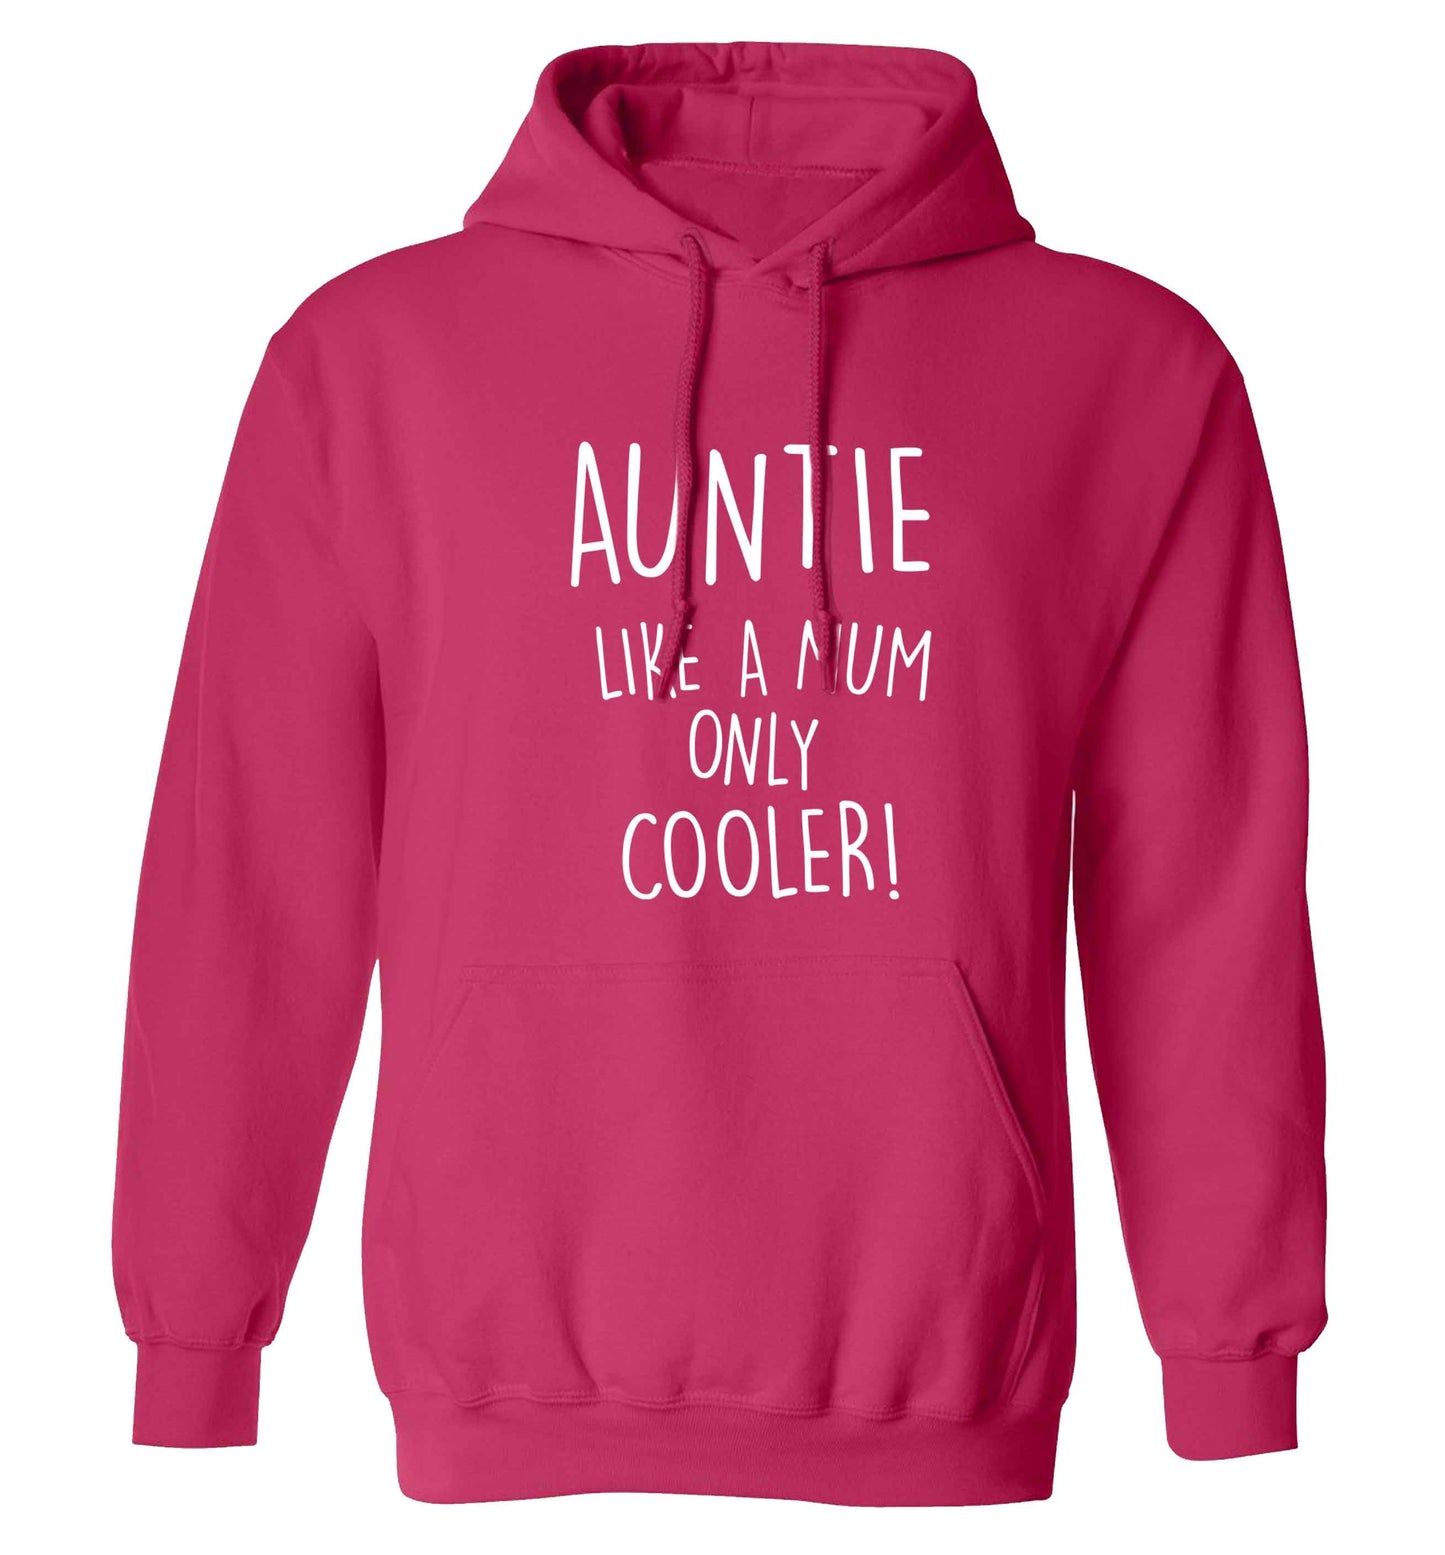 Auntie like a mum only cooler adults unisex pink hoodie 2XL